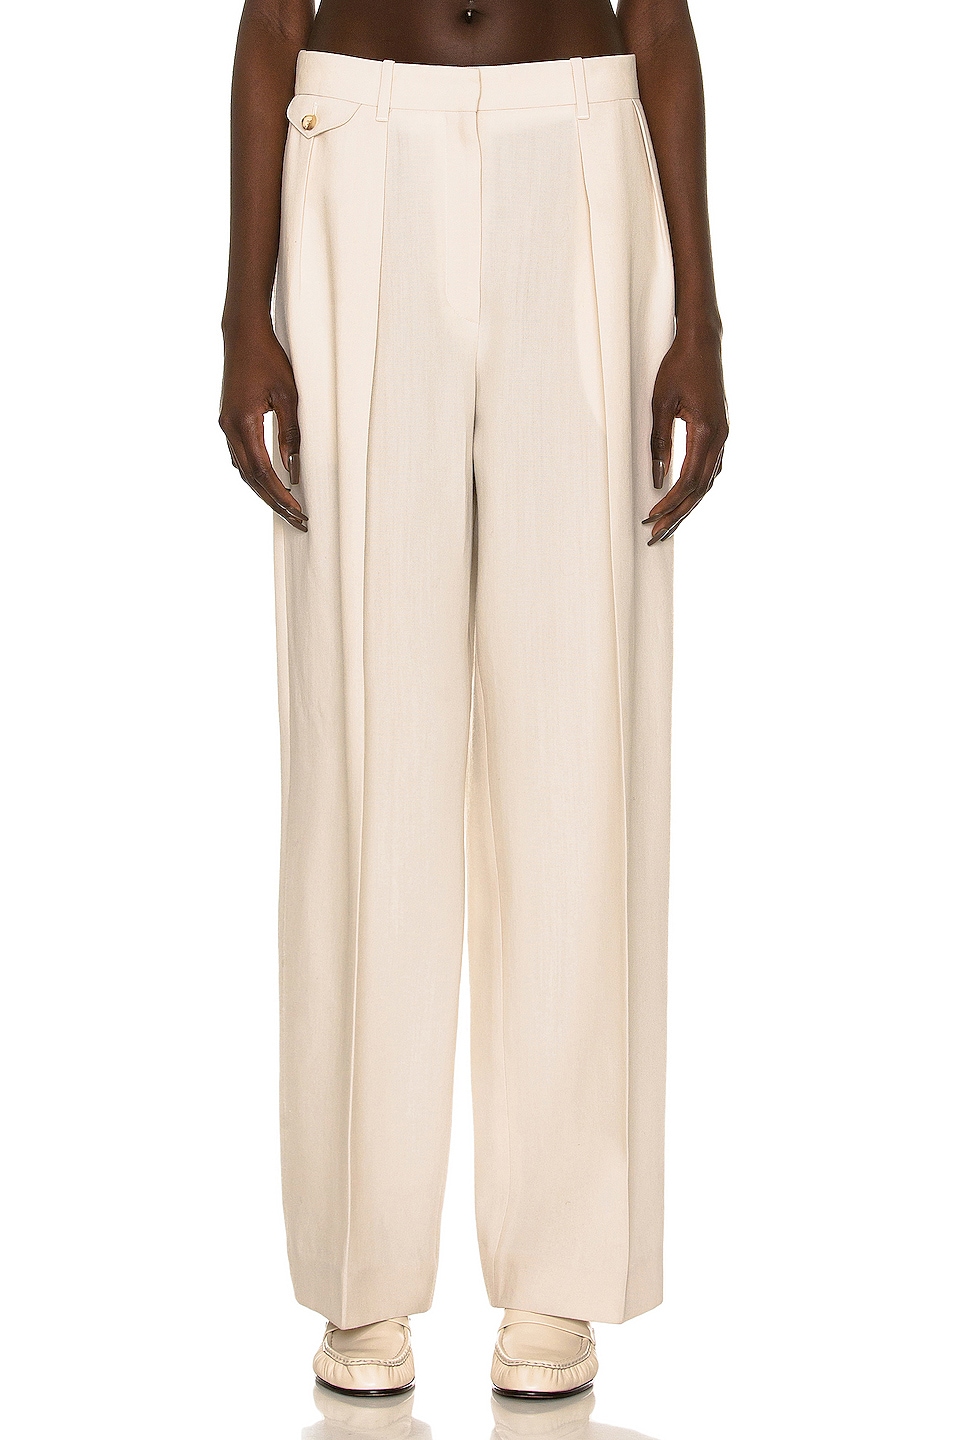 Image 1 of The Row Marcelina Pant in Eggshell